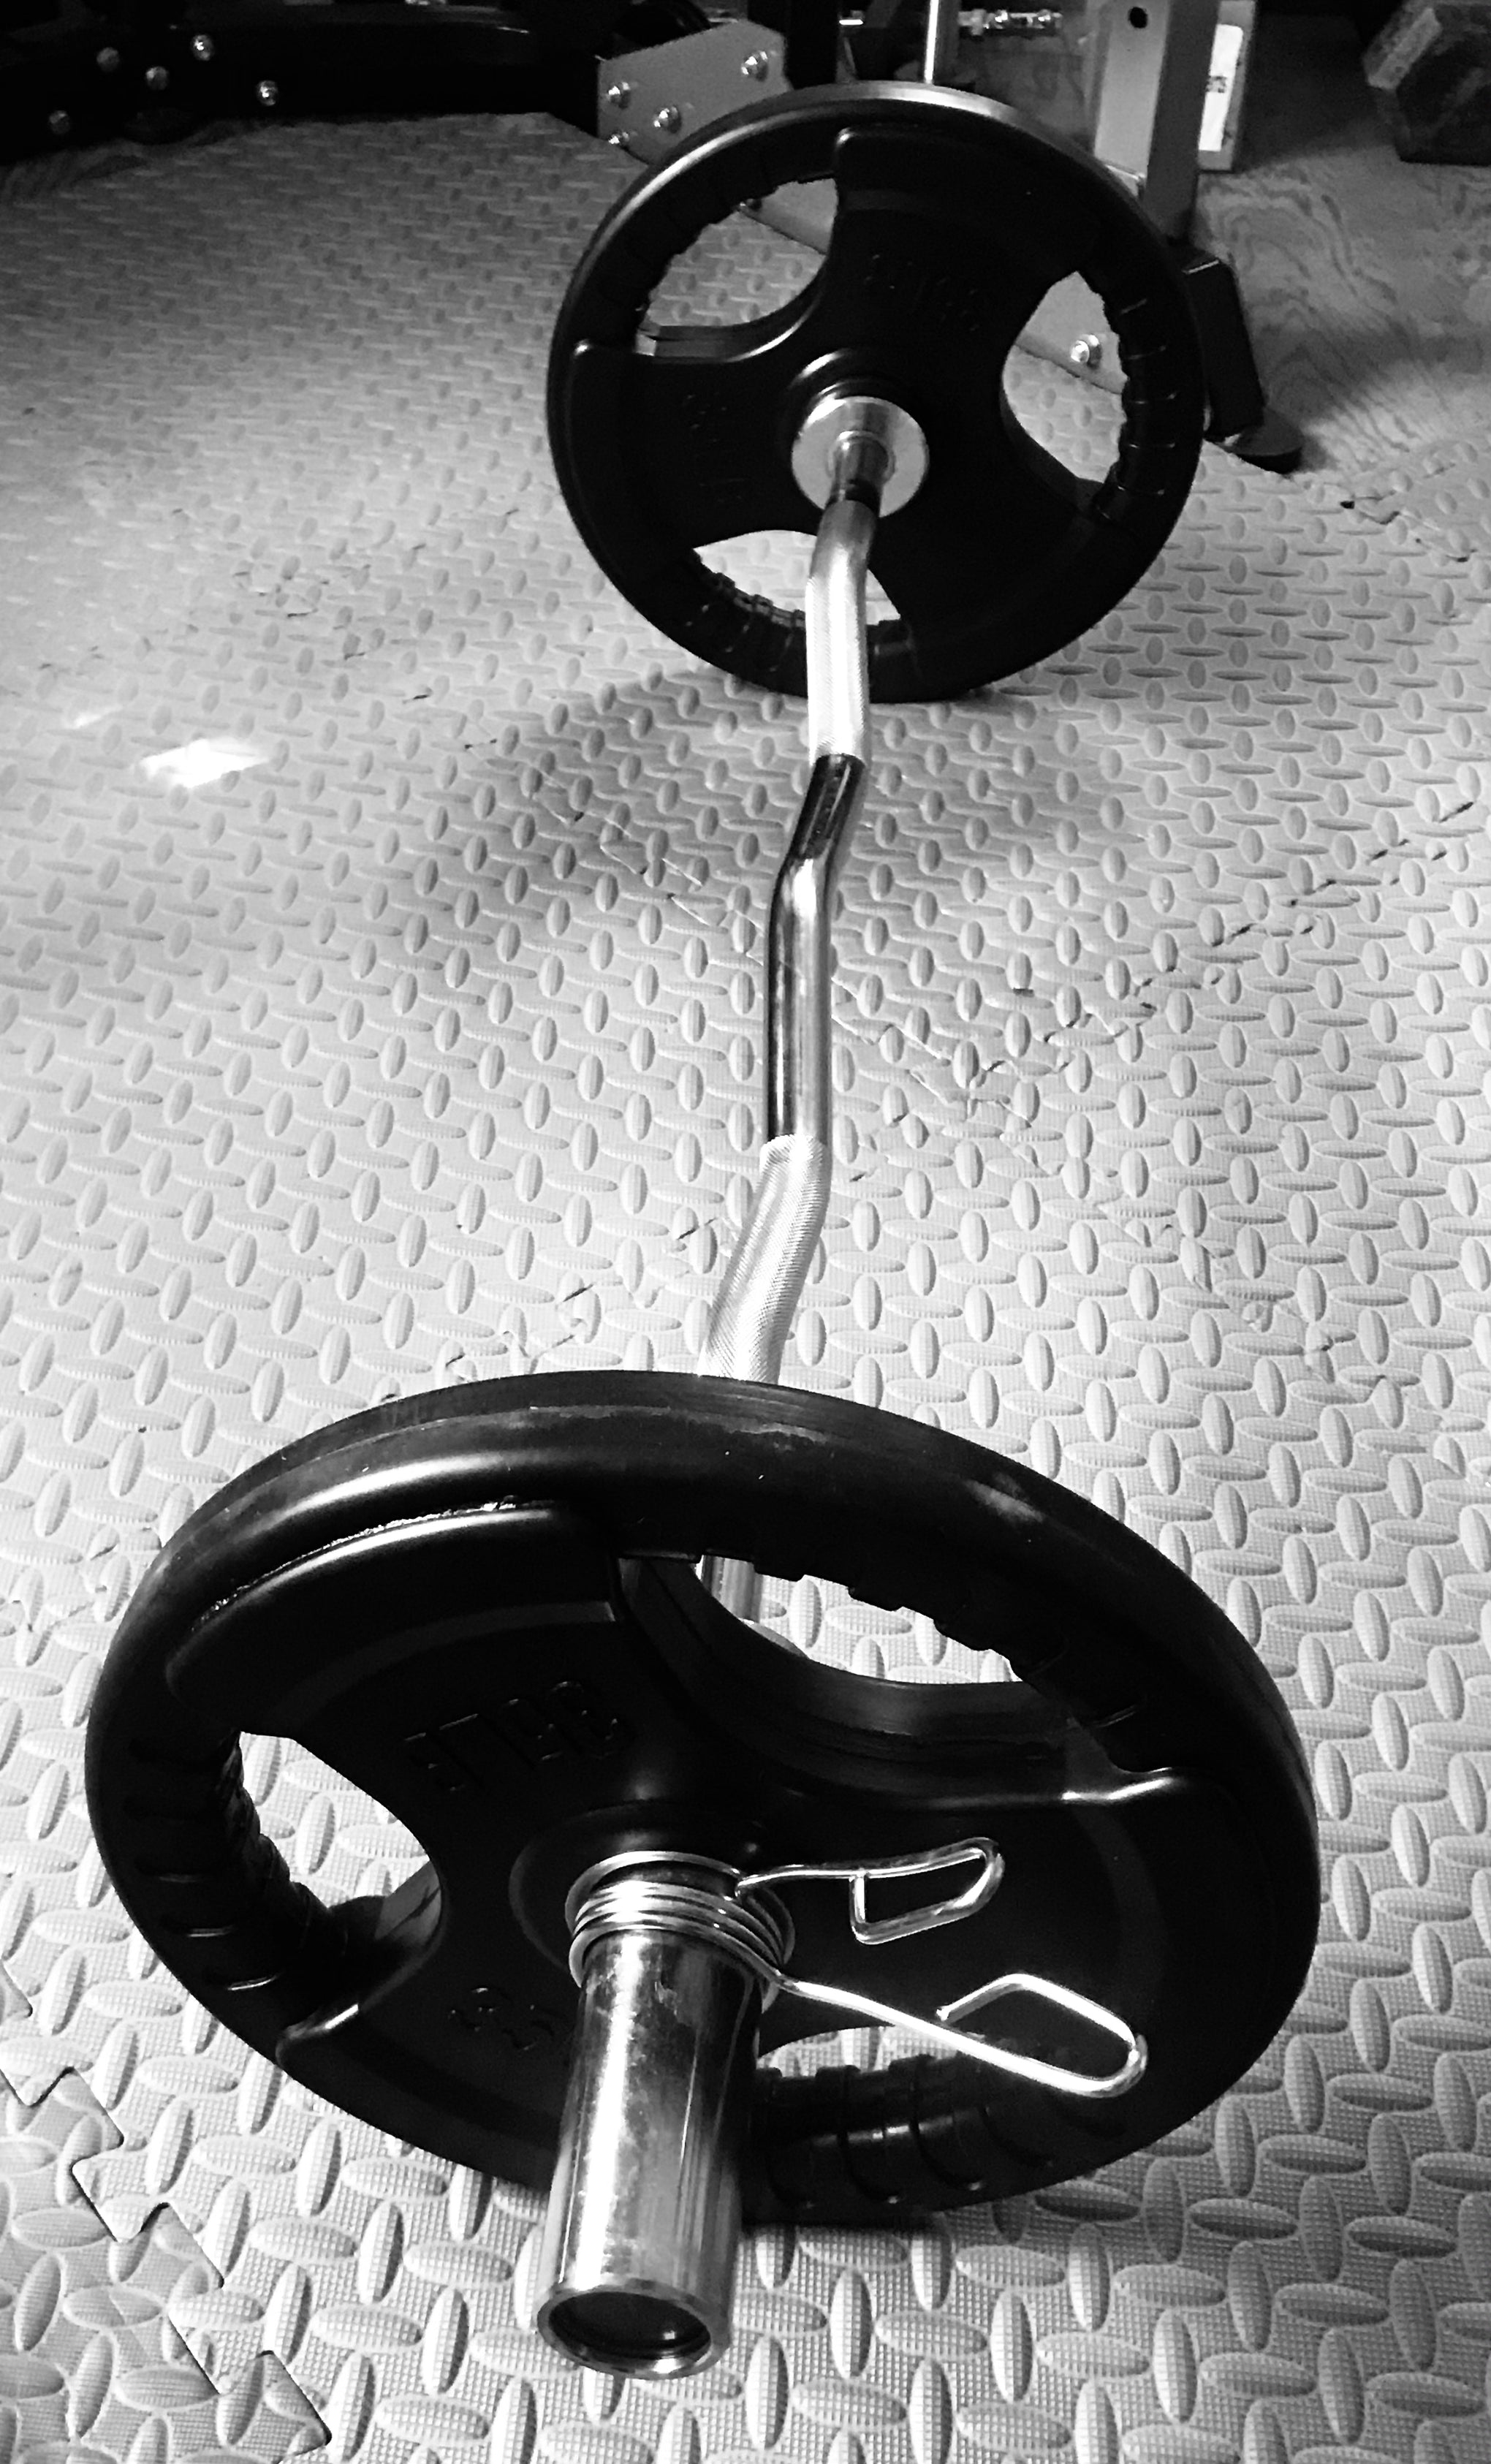 Weights with commercial grade stainless steel curl bar